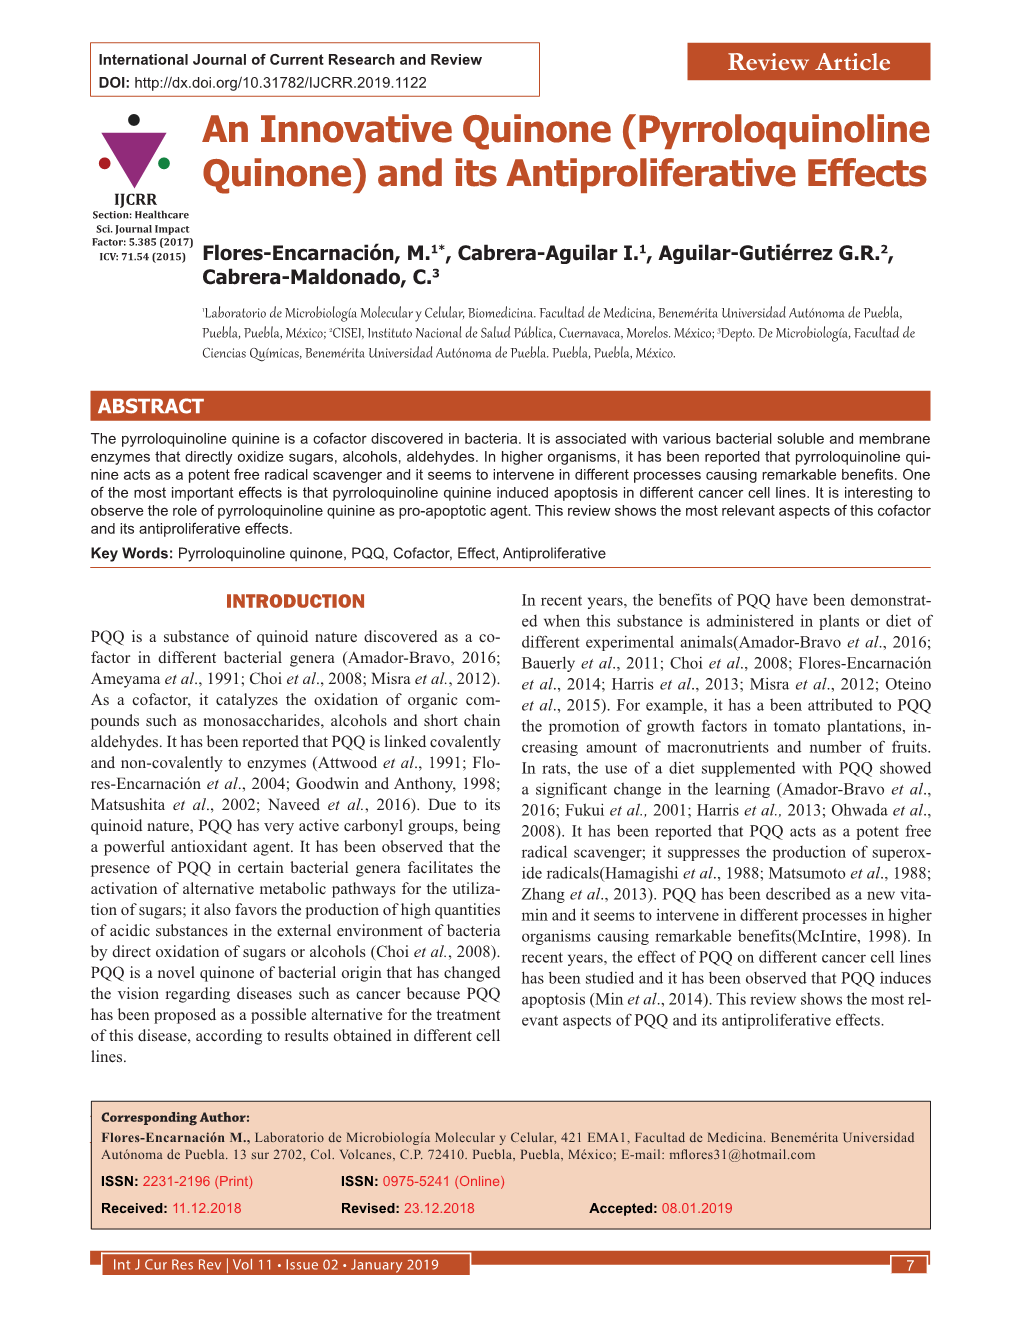 (Pyrroloquinoline Quinone) and Its Antiproliferative Effects IJCRR Section: Healthcare Sci